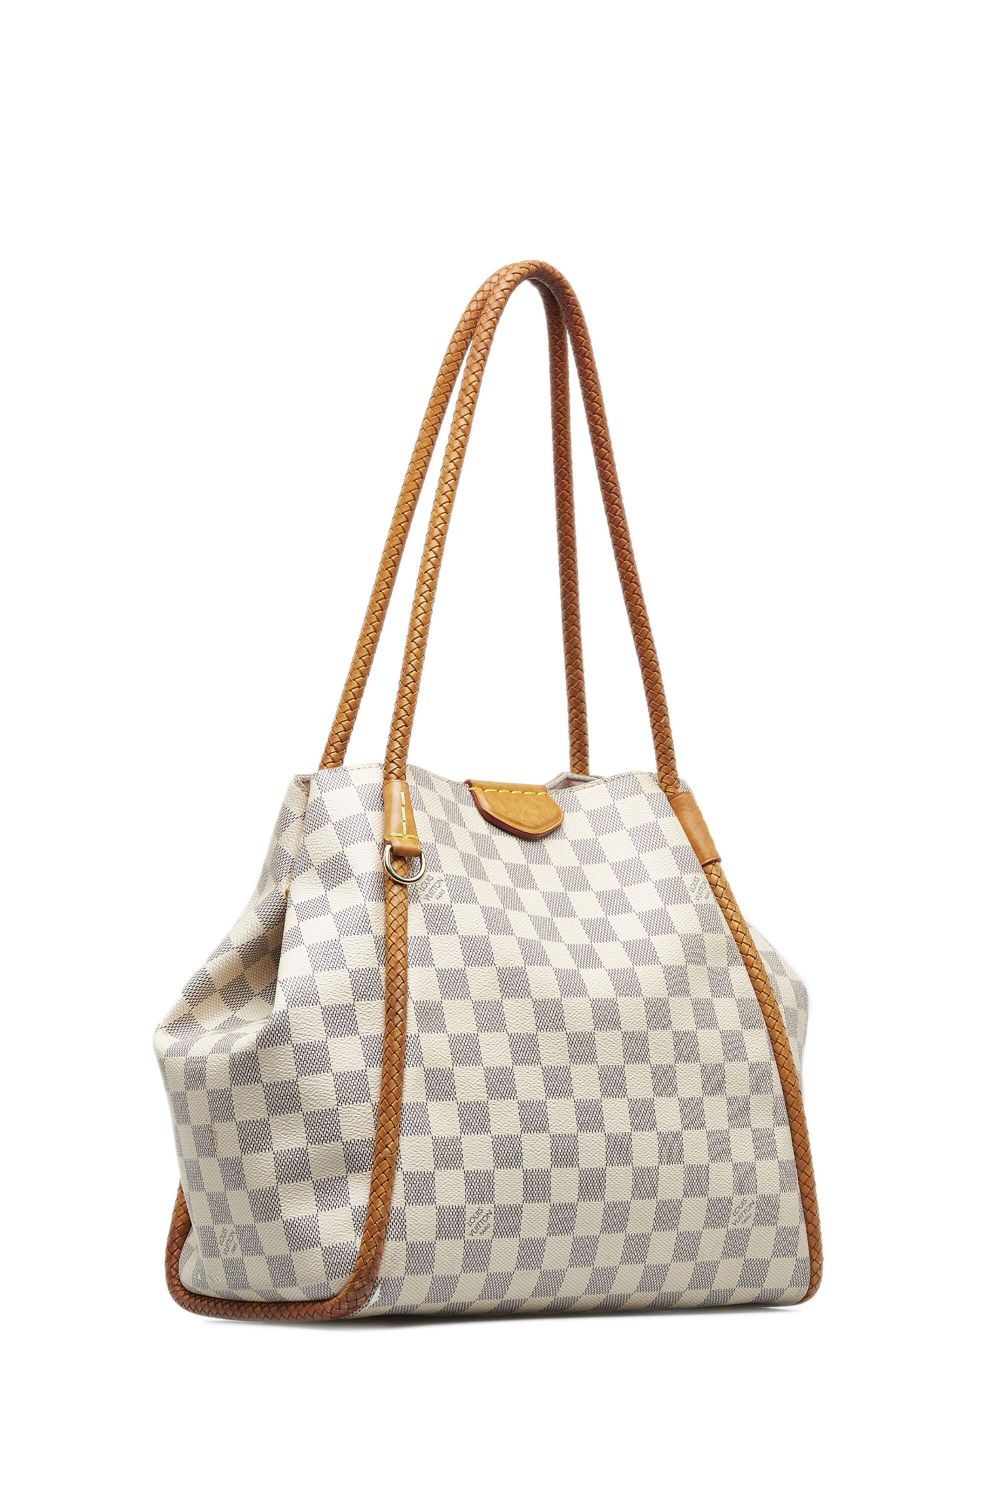 Pre-owned Louis Vuitton 2017   Damier Azur Propriano Tote Bag In Blue